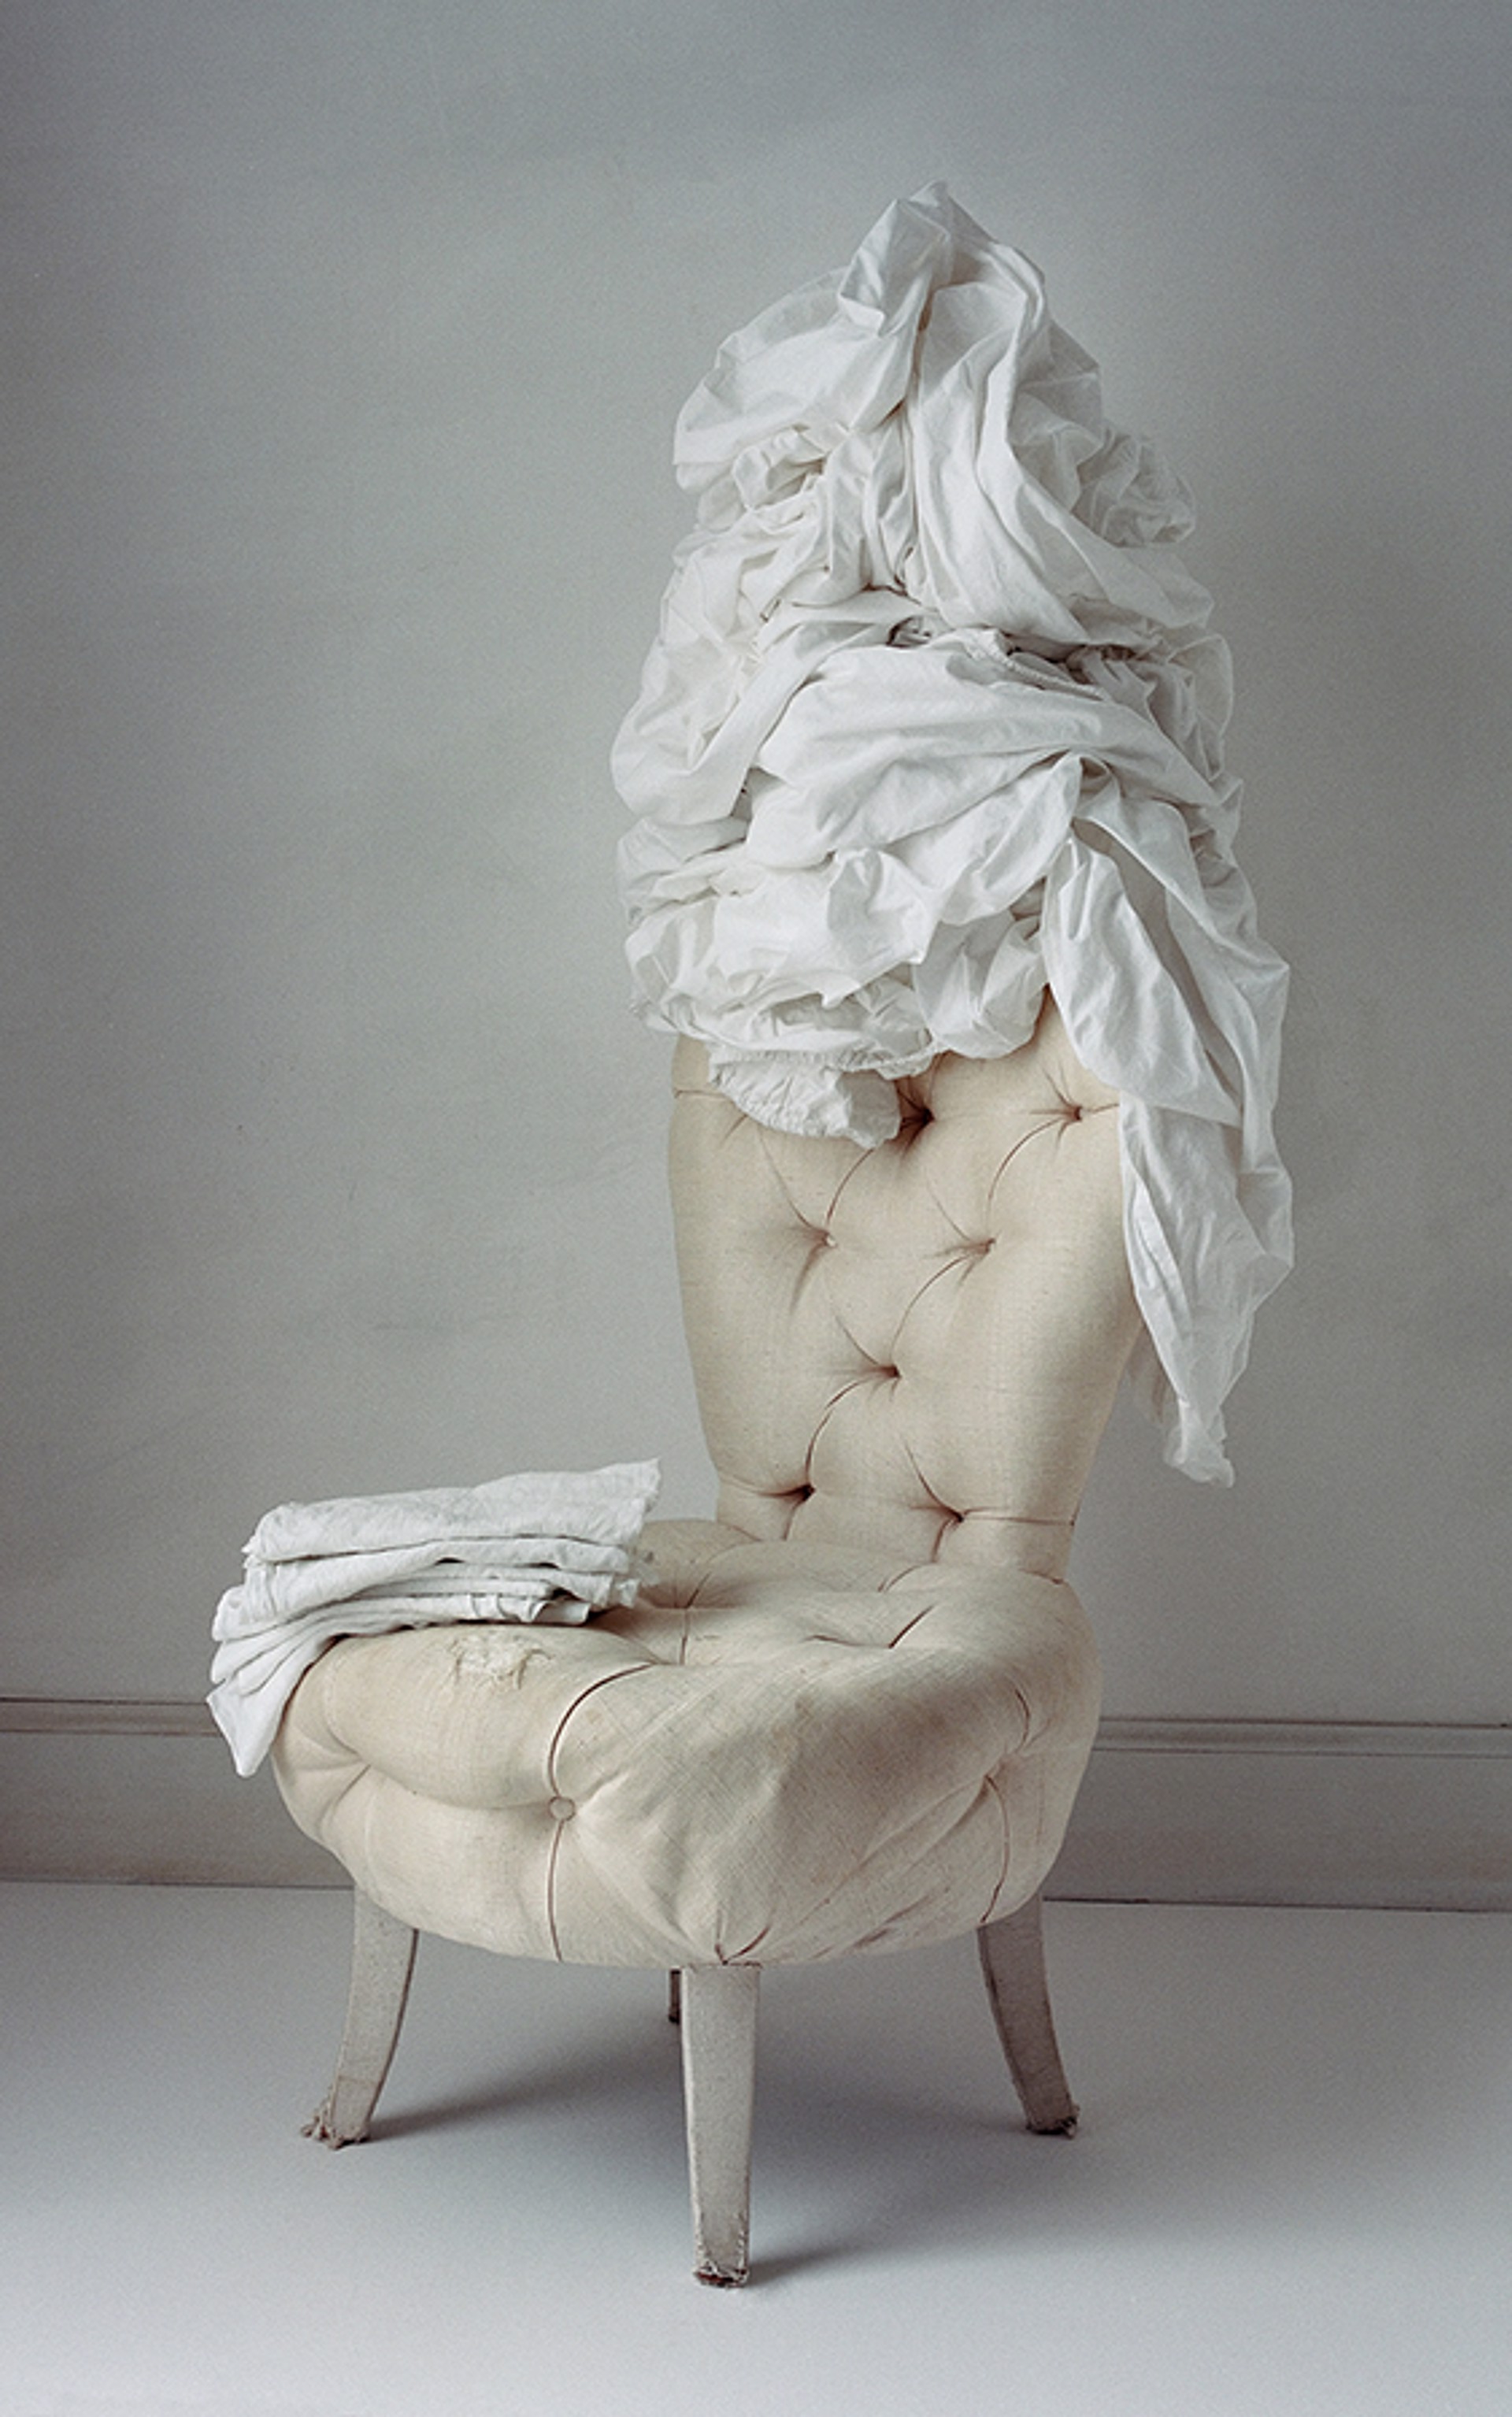 Chair, Napkins, and Sheets by David Halliday